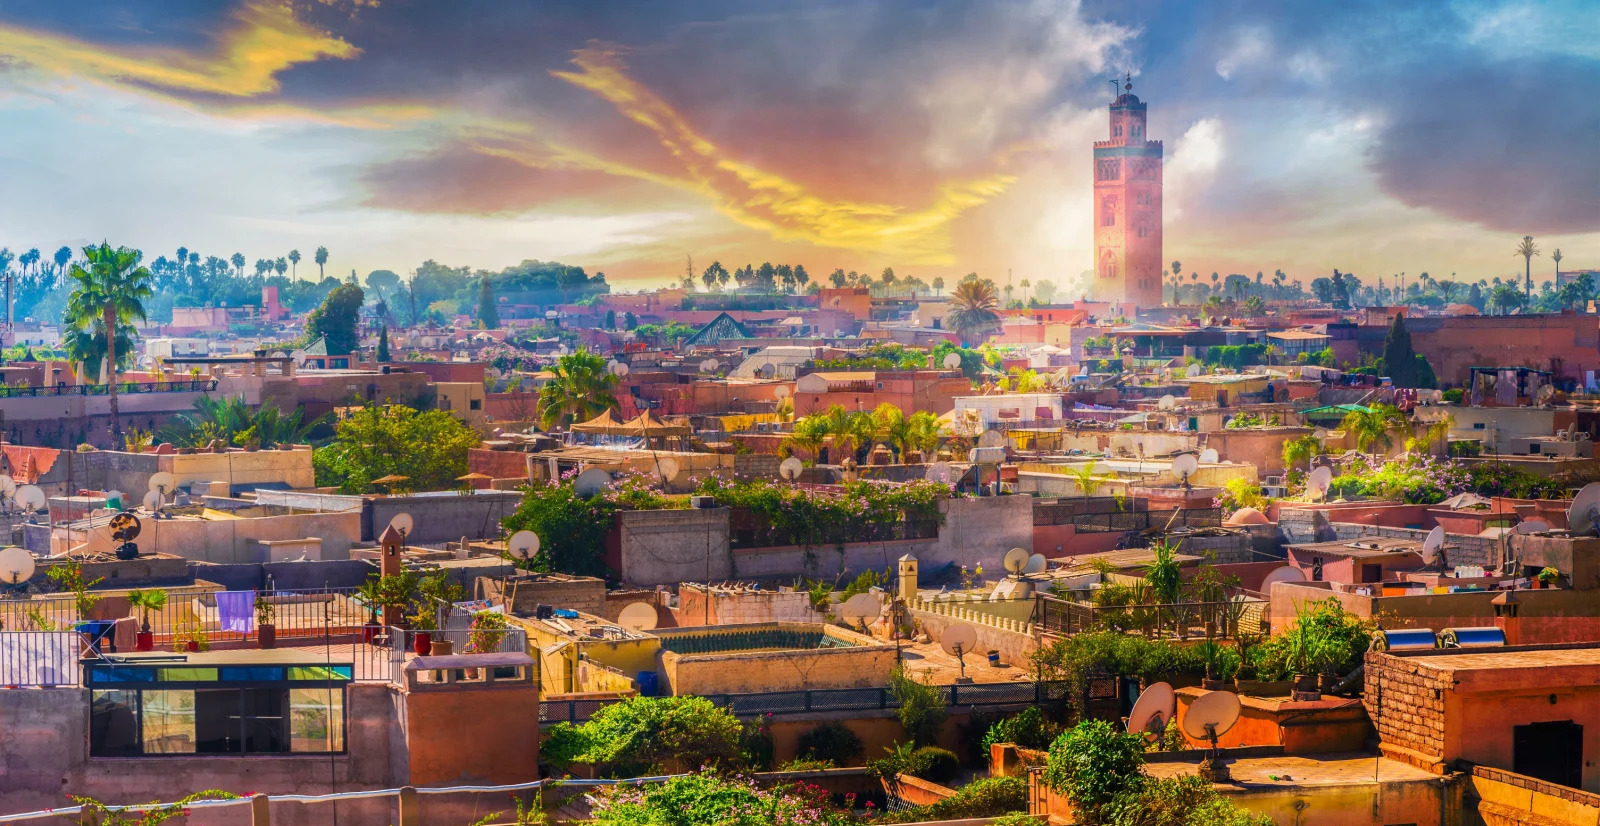 Marrakech Excursion: A Complete Guide to the Red City